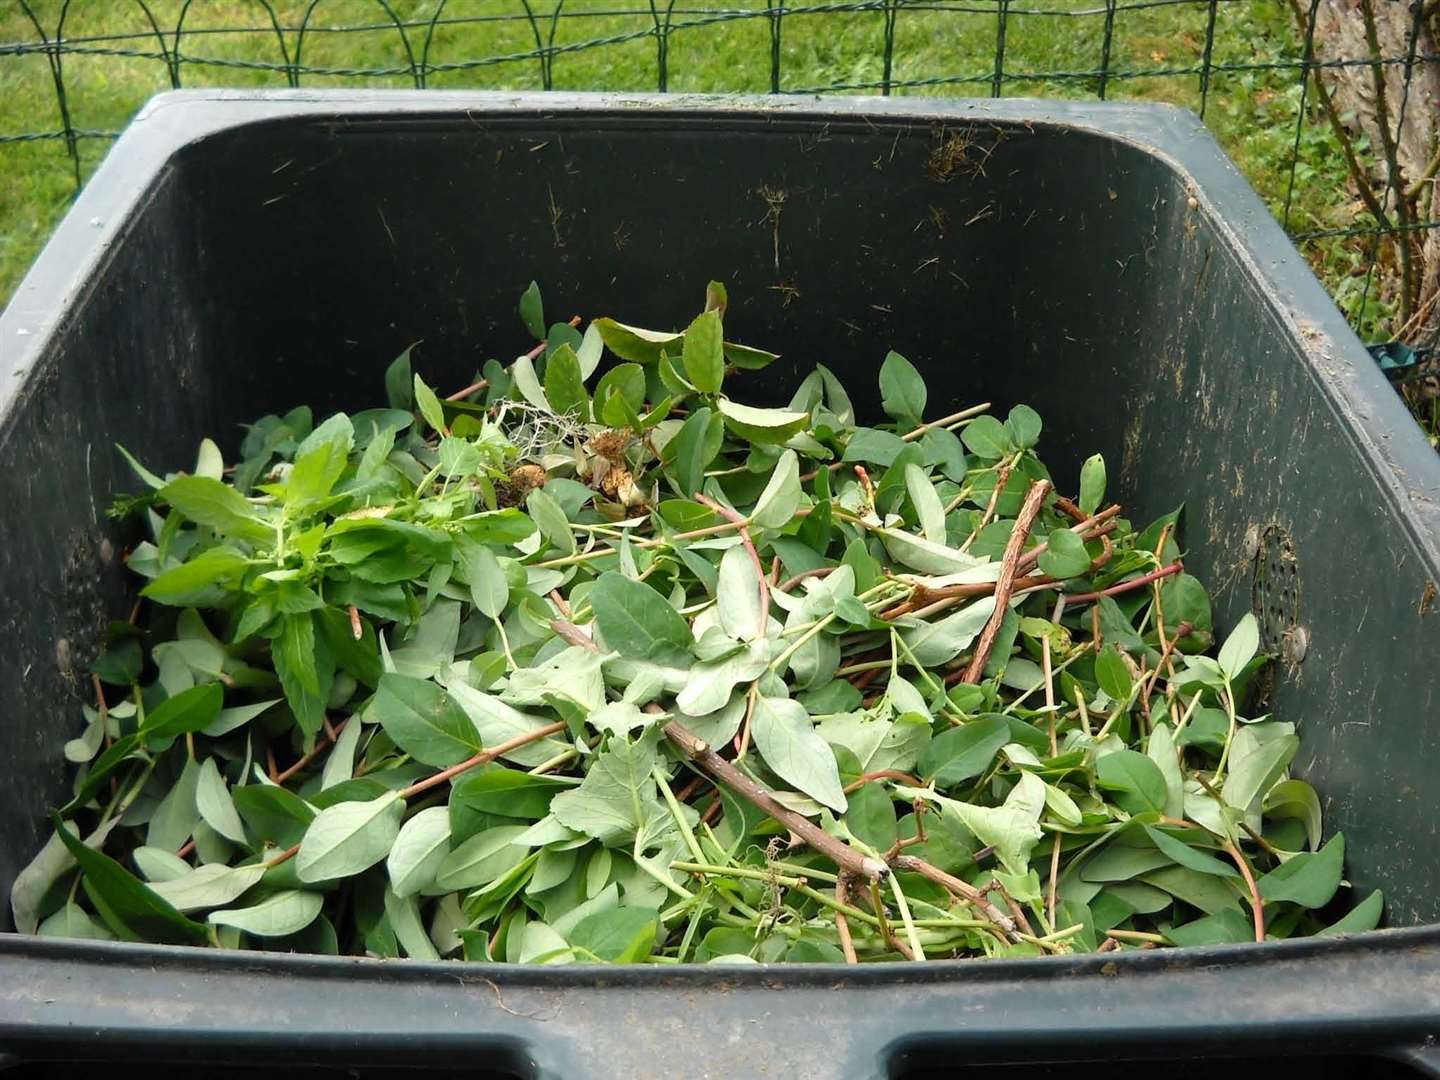 The garden waste collection service was suspended in July